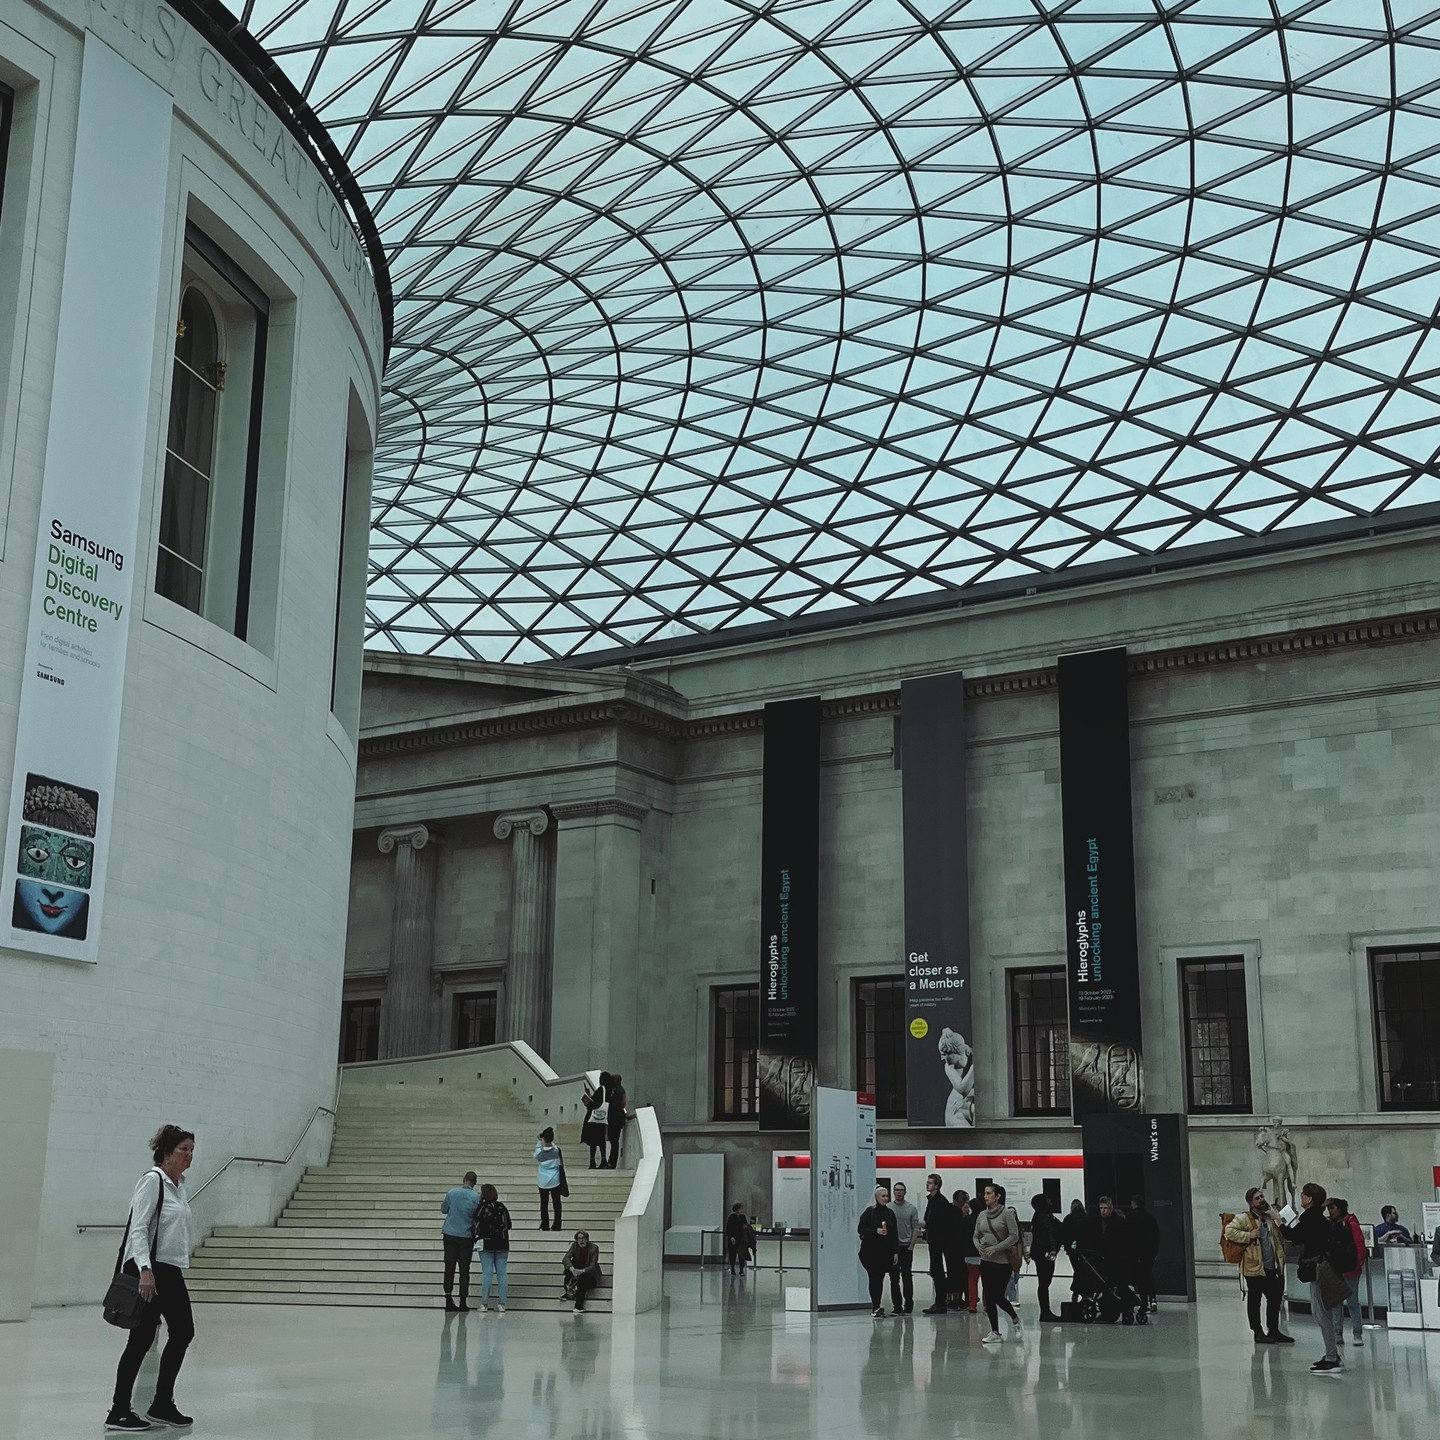 at the British Museum 
Start 3d Scanning Project